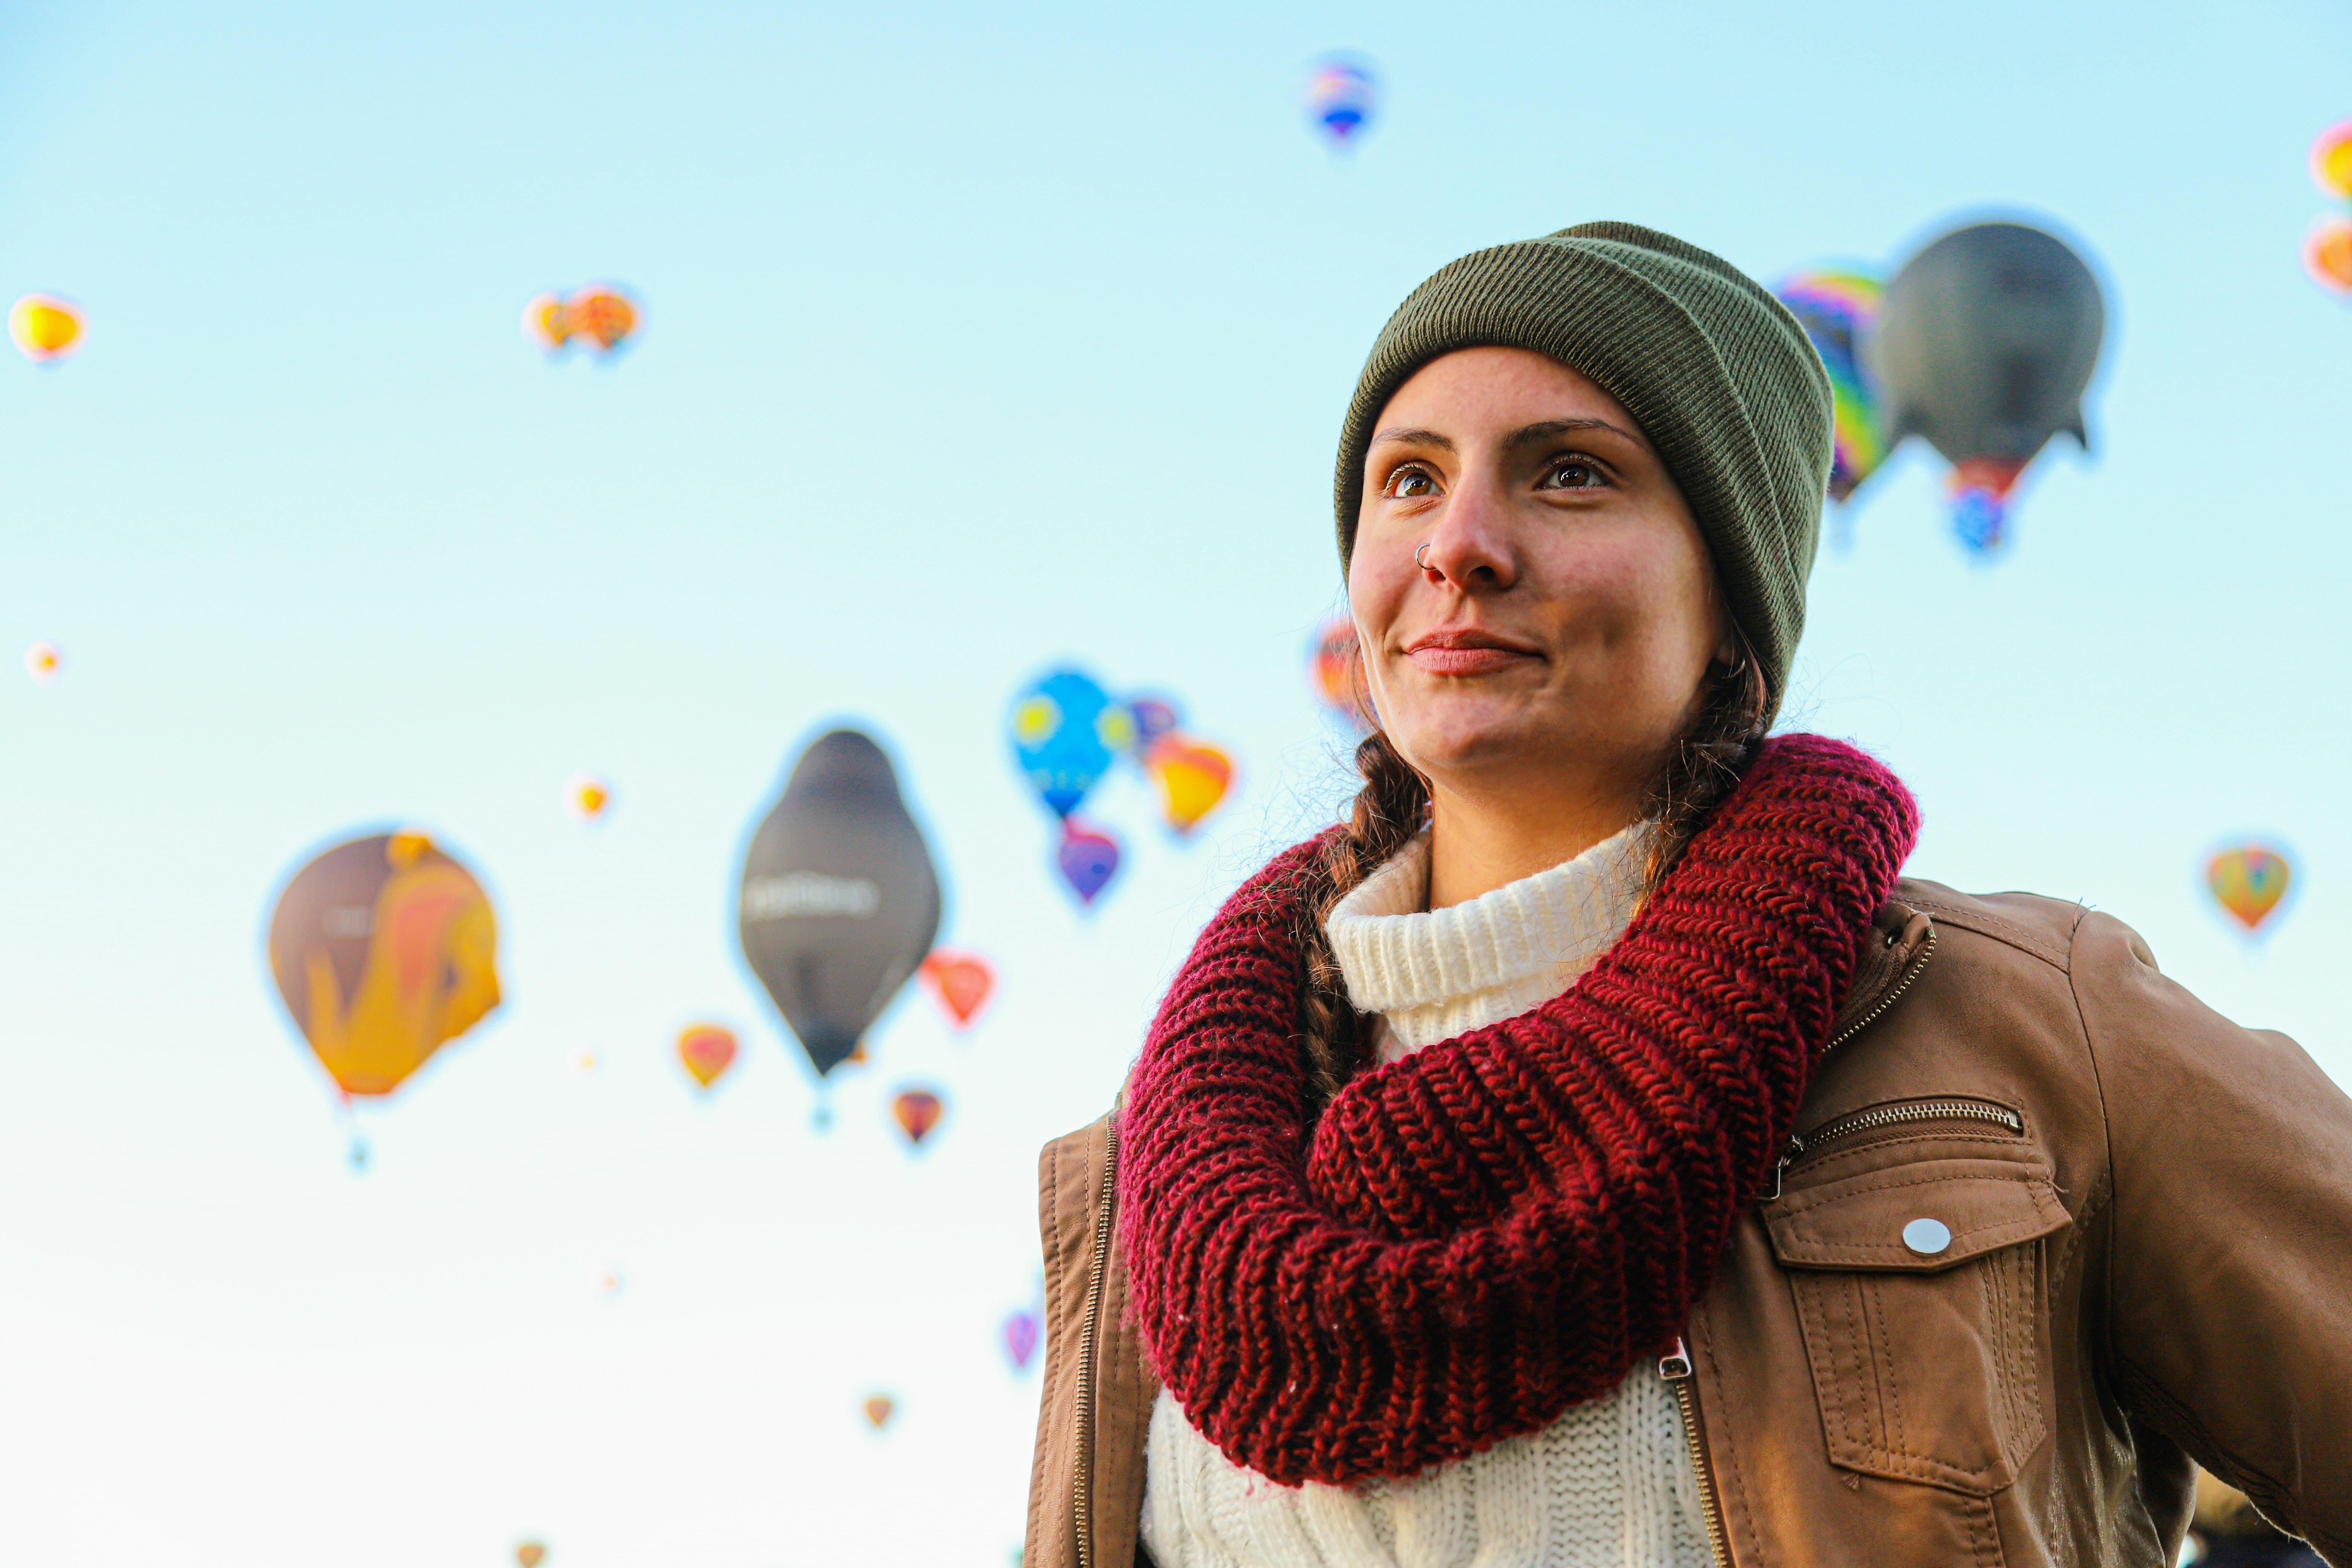 Girl Dressed Warmly for a Hot Air Balloon Ride in Dubai